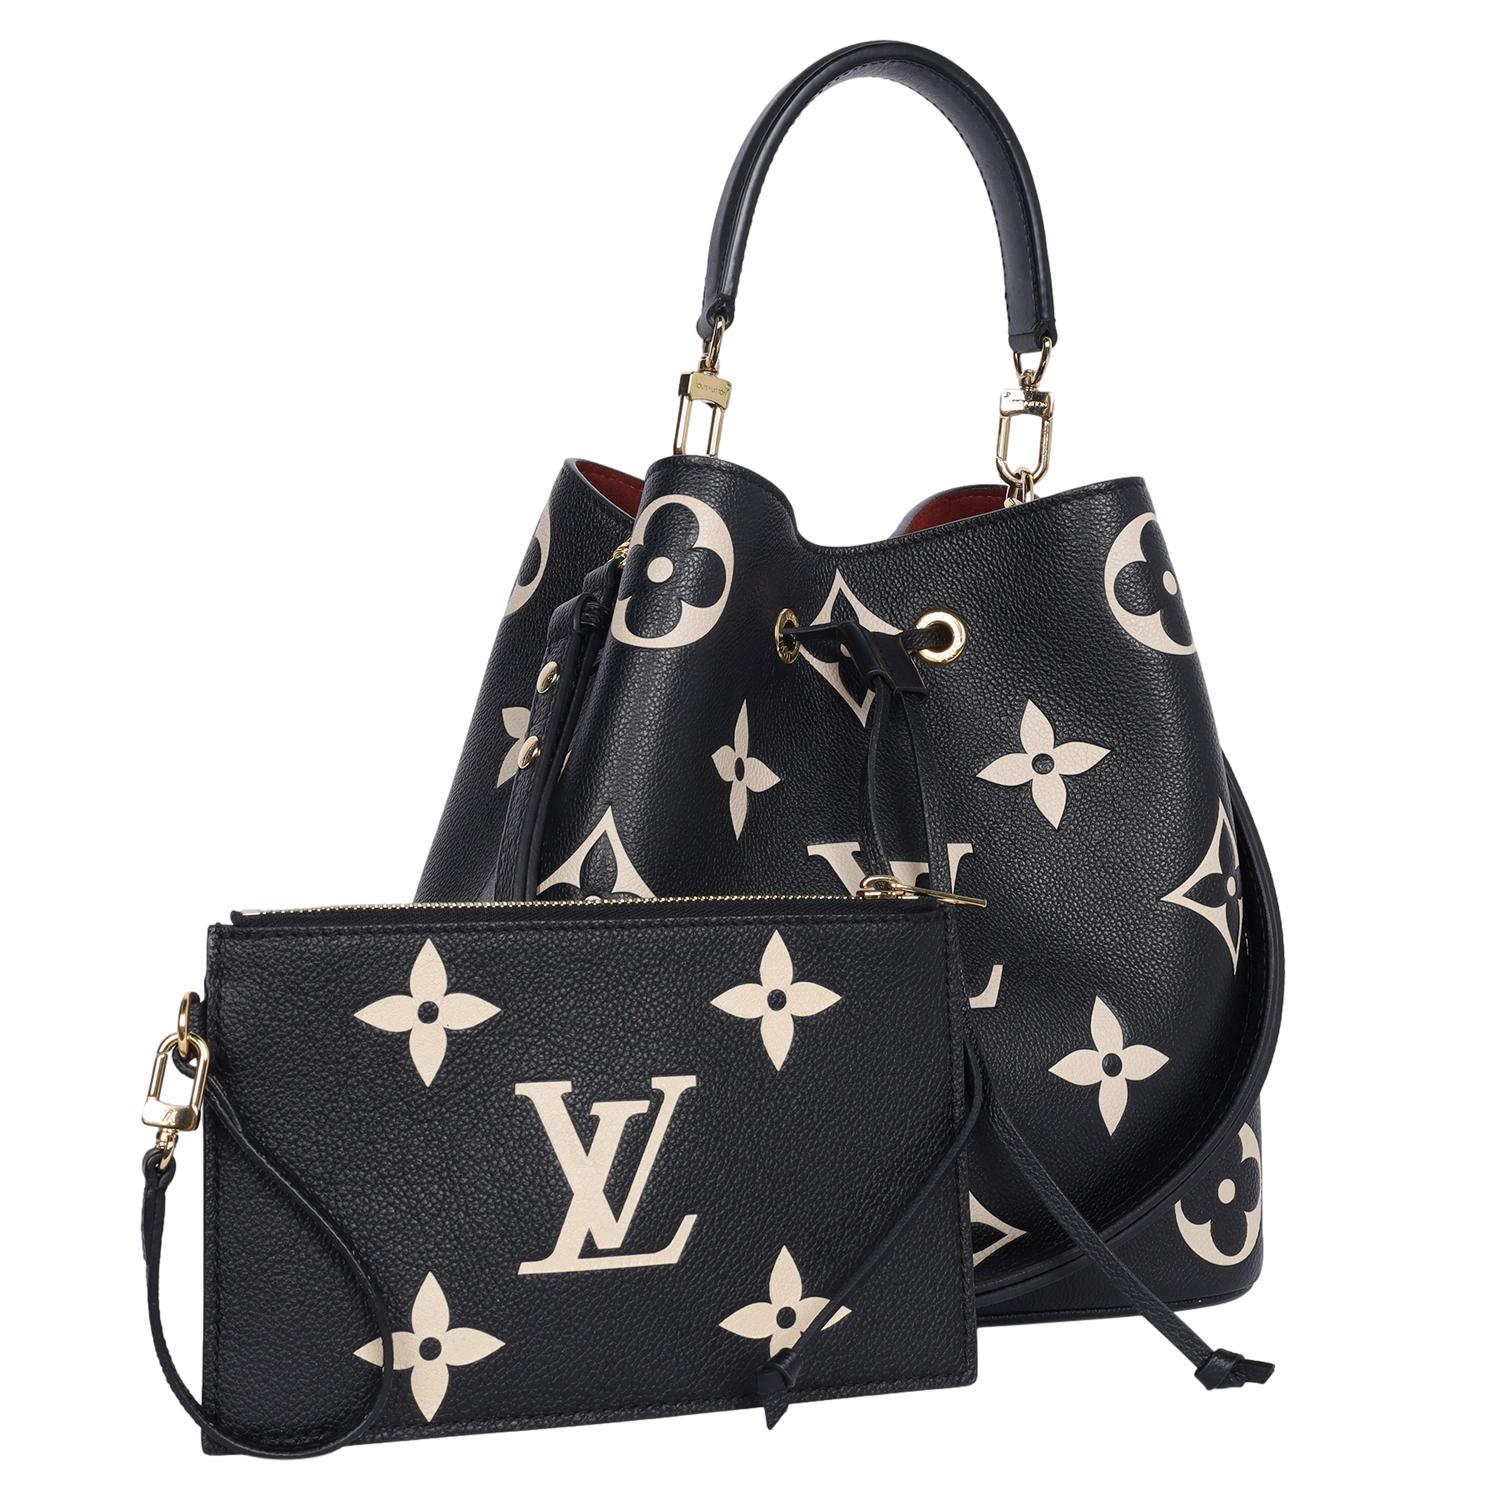 Authentic Louis Vuitton Black NeoNoe MM Empreinte Giant tote with pochette. The bold LV initials and monogram flowers bring a fashionable feel to this NeoNoe MM bucket bag. The motif is first printed on the leather then embossed to enhance the